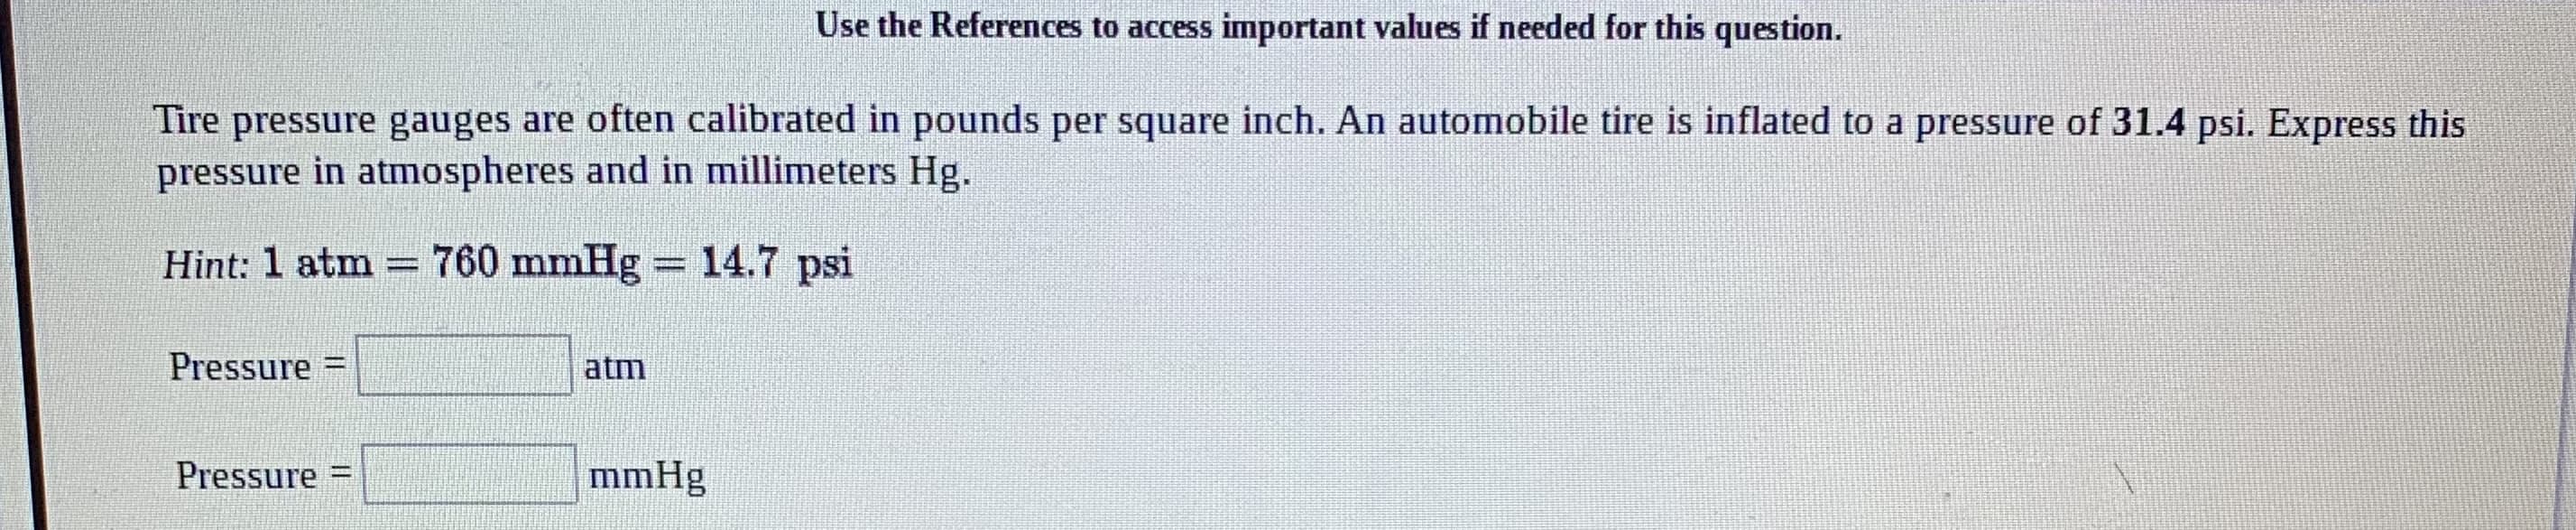 Use the References to access important values if needed for this question.
Tire pressure gauges are often calibrated in pounds per square inch. An automobile tire is inflated to a pressure of 31.4 psi. Express this
pressure in atmospheres and in millimeters Hg.
Hint: 1 atm = 760 mmHg = 14.7 psi
%3D
Pressure
atm
%3D
Pressure =
mmHg
